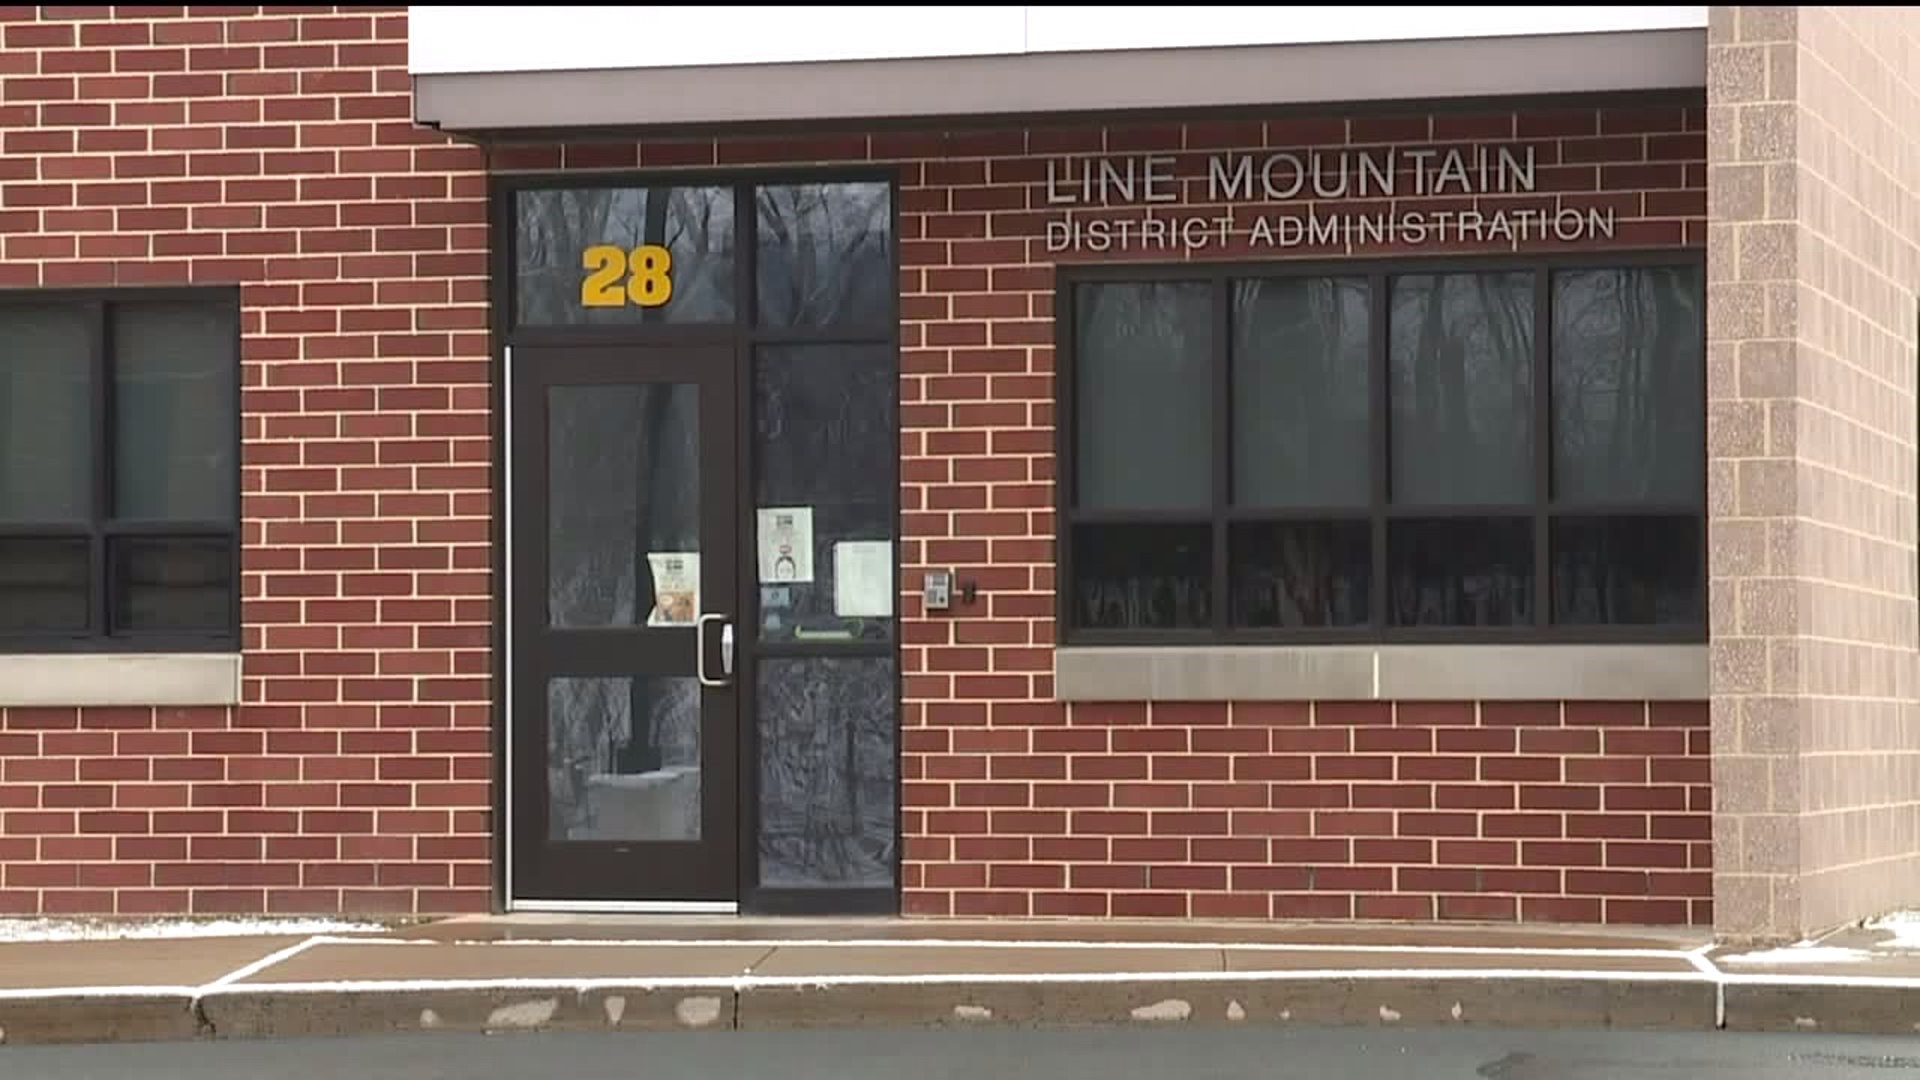 Teen Charged in Line Mountain 'Swatting' Call